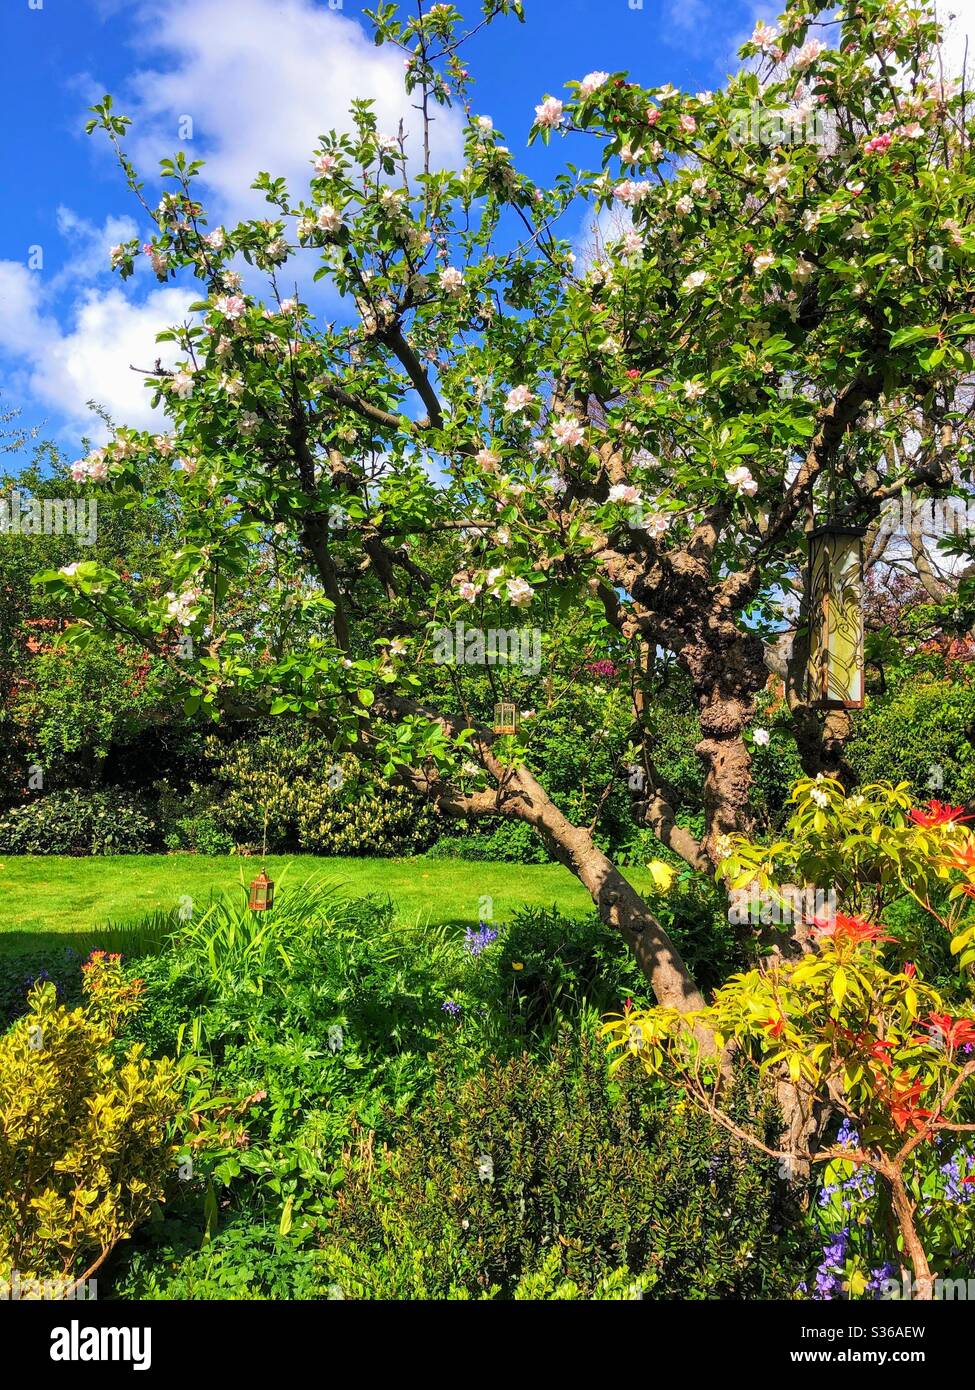 Mature garden with apple tree, lawn and flower borders, England, United Kingdom Stock Photo